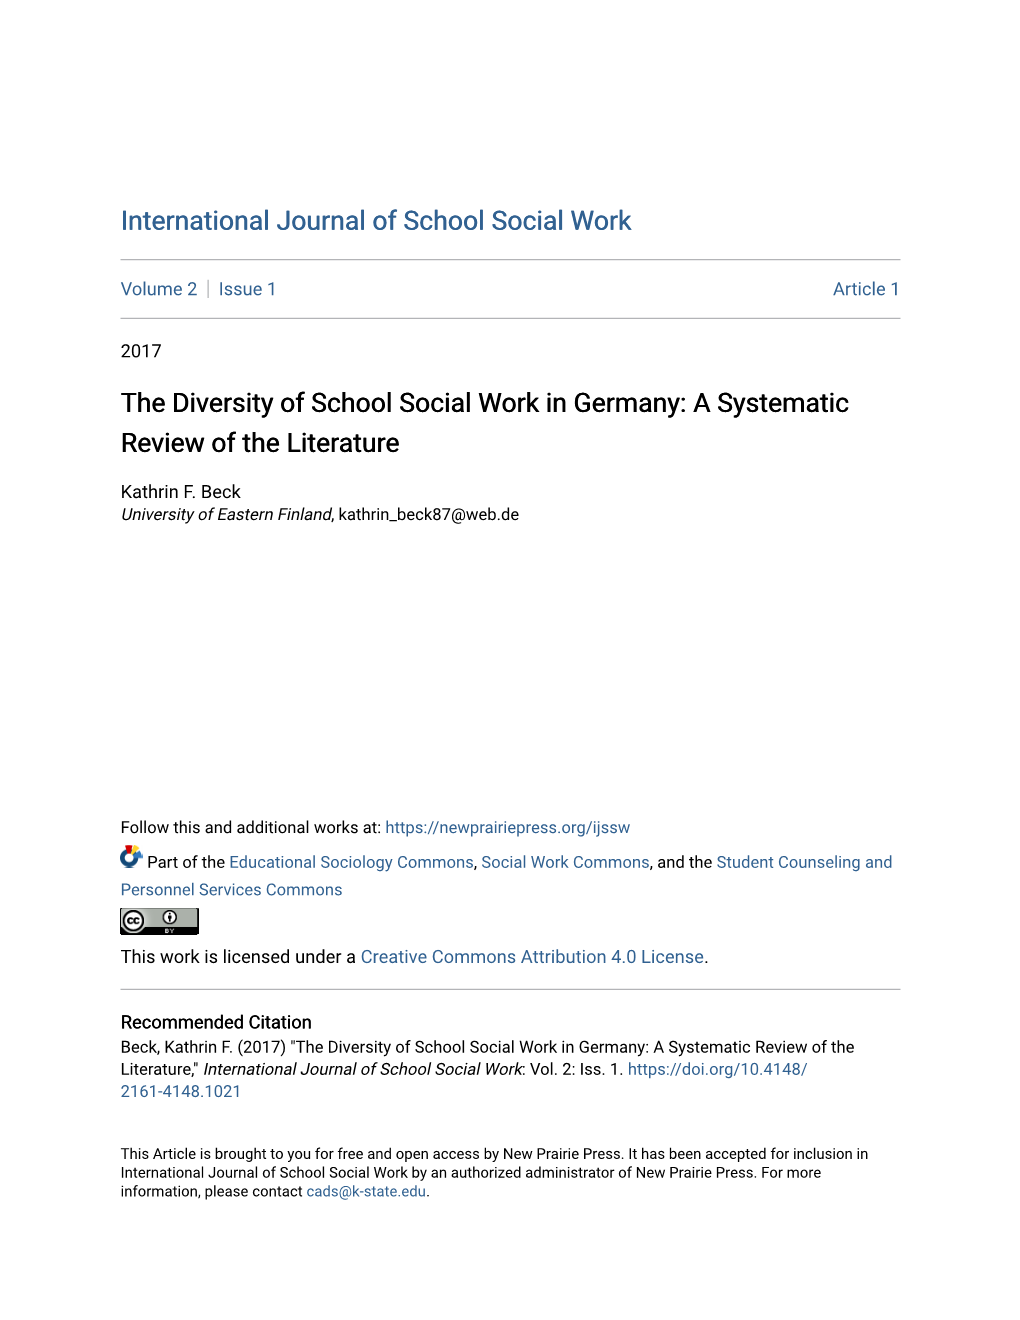 The Diversity of School Social Work in Germany: a Systematic Review of the Literature